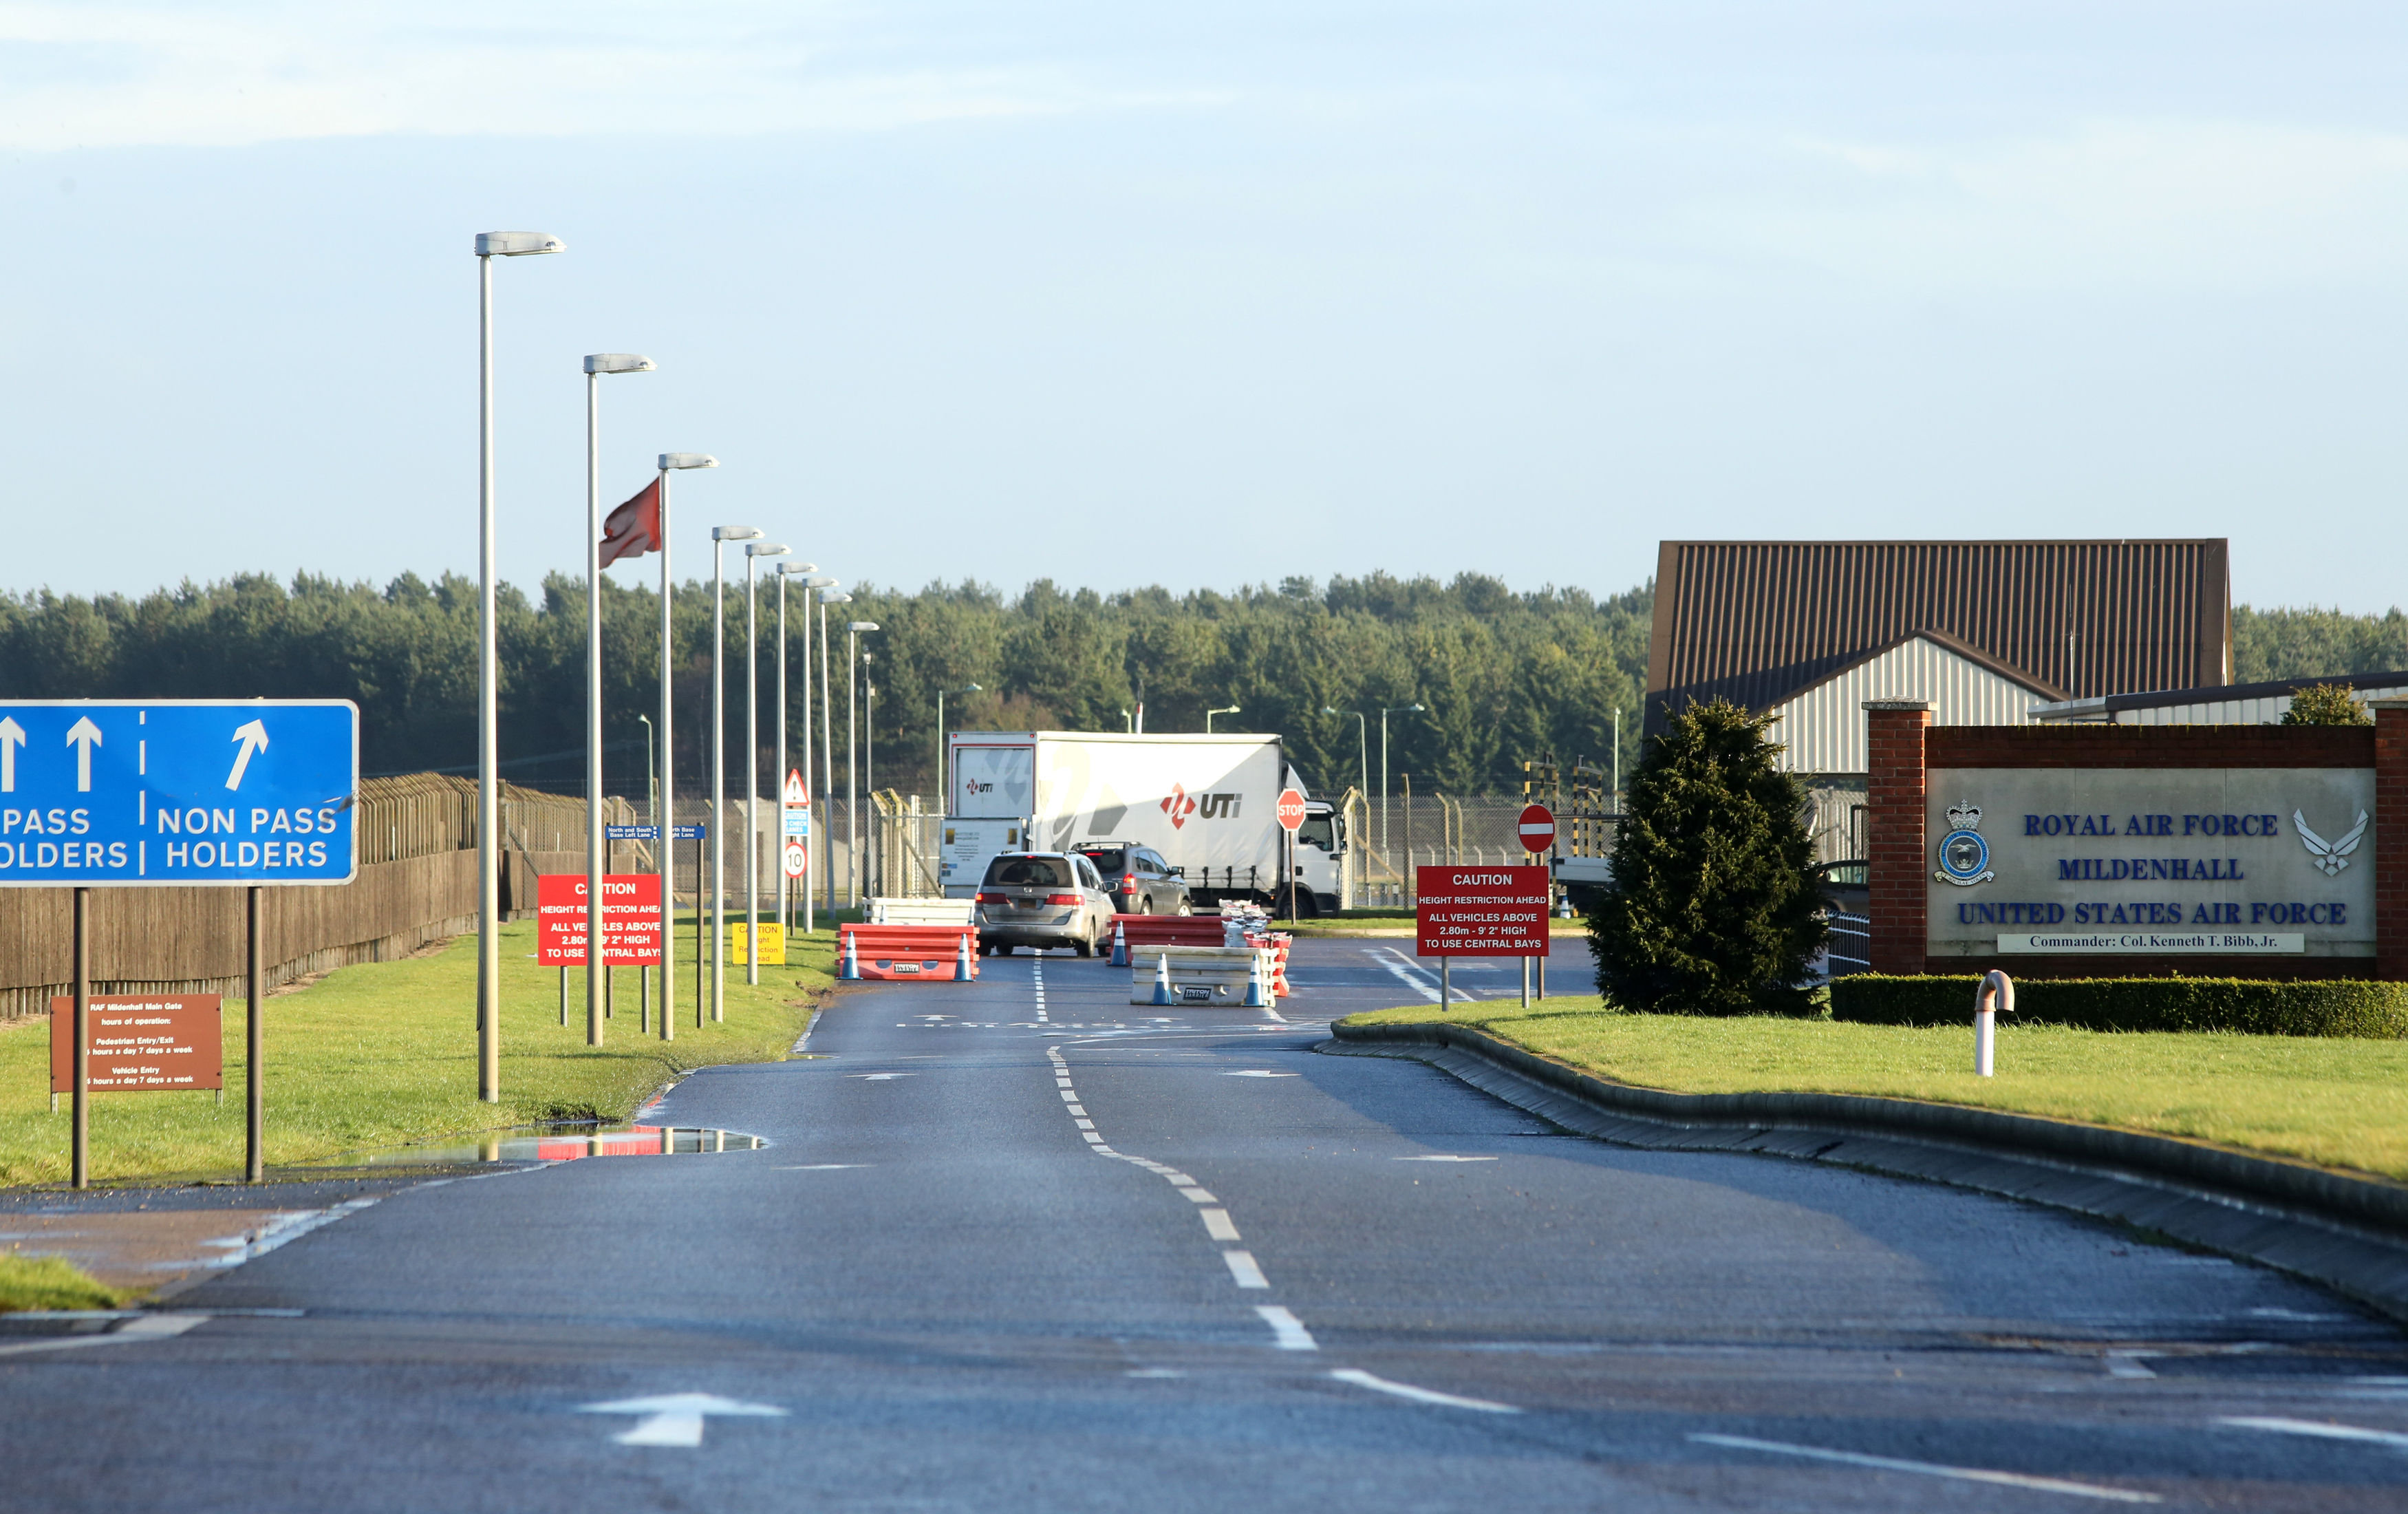 <strong>A man has been arrested after a 'significant incident' at RAF Mildenhall, in Suffolk, pictured above</strong>